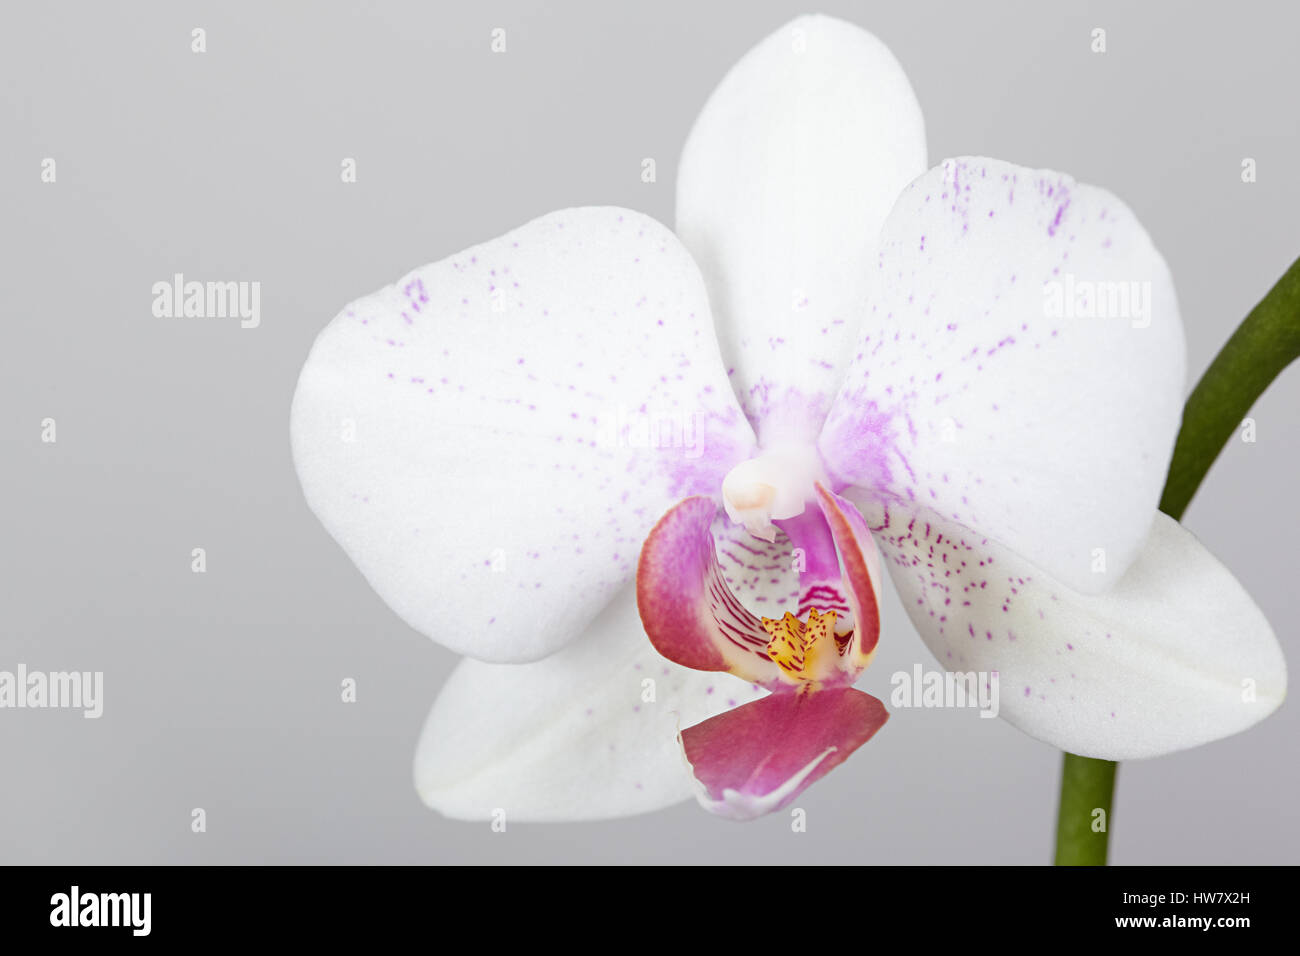 The flower of orchids on a grey background Stock Photo